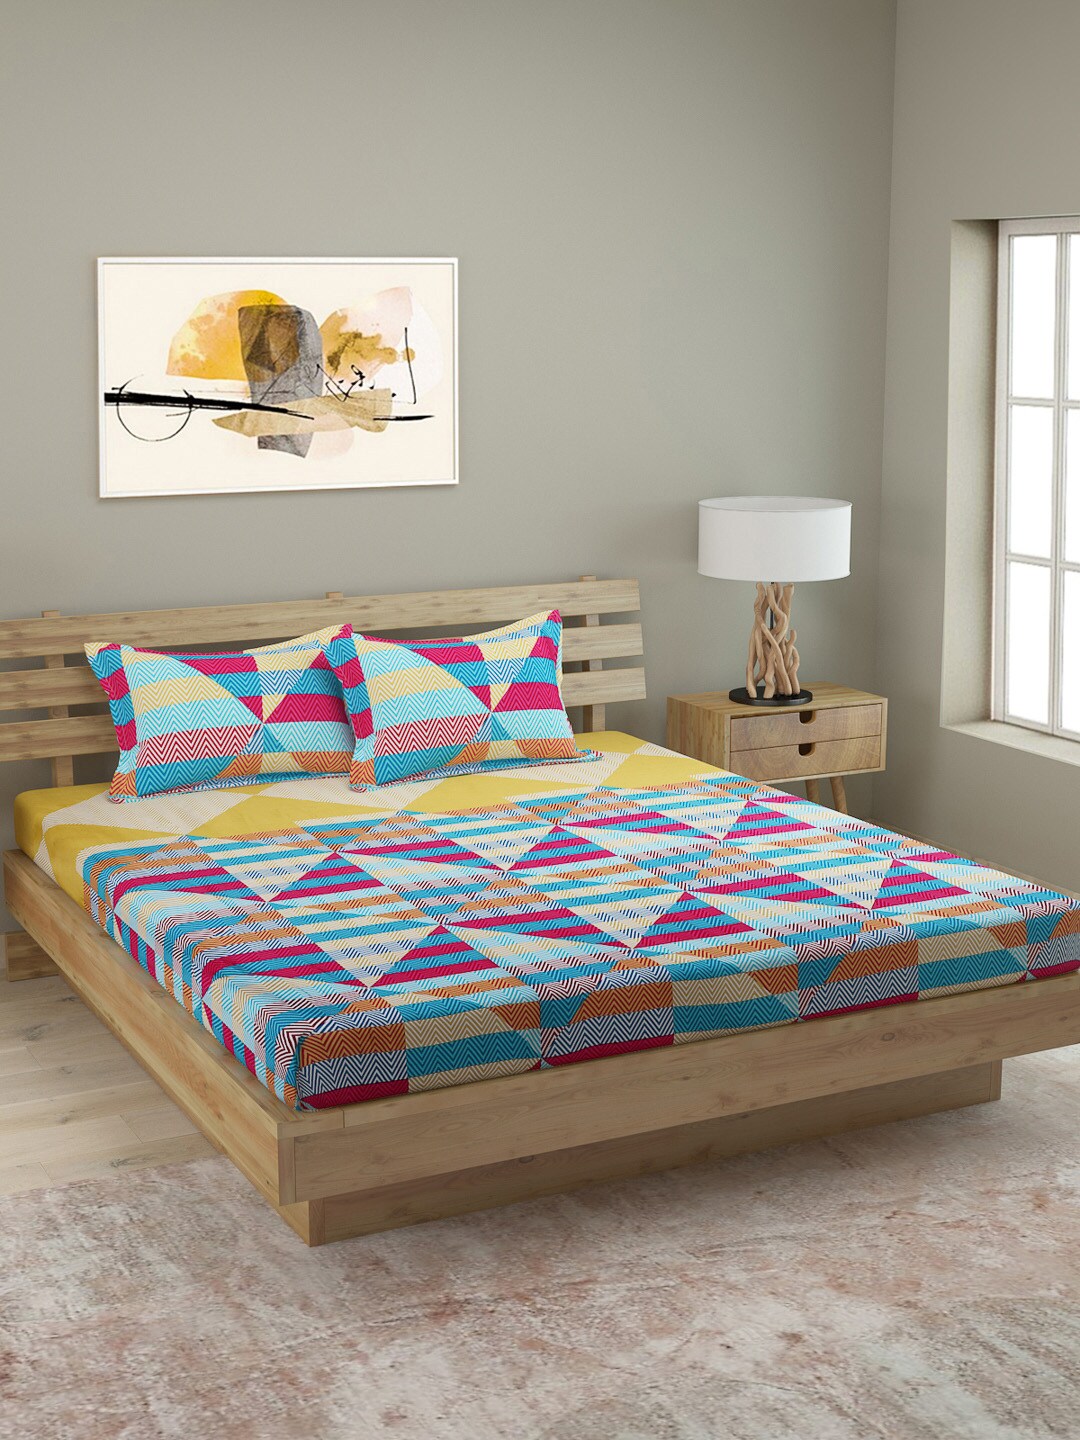 ROMEE Multicoloured Geometric 250 TC Cotton 1 King Bedsheet with 2 Pillow Covers Price in India